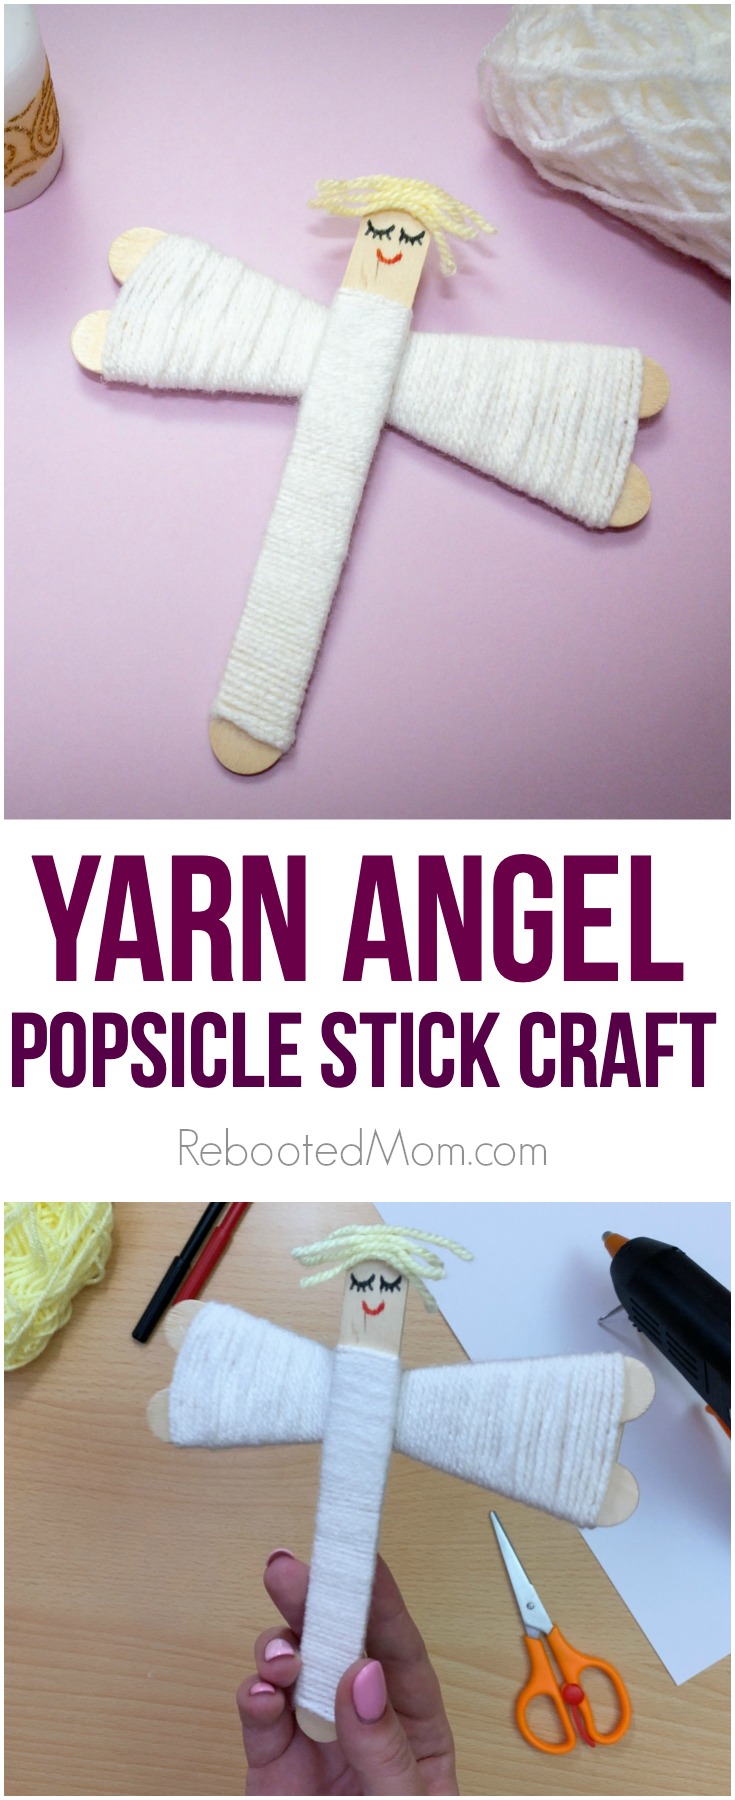 Step by step instructions &  video to help your children create an adorable yarn angel popsicle stick craft you can use as an ornament this holiday season! #craft #popsiclestick #yarn #angel #kids #christmas